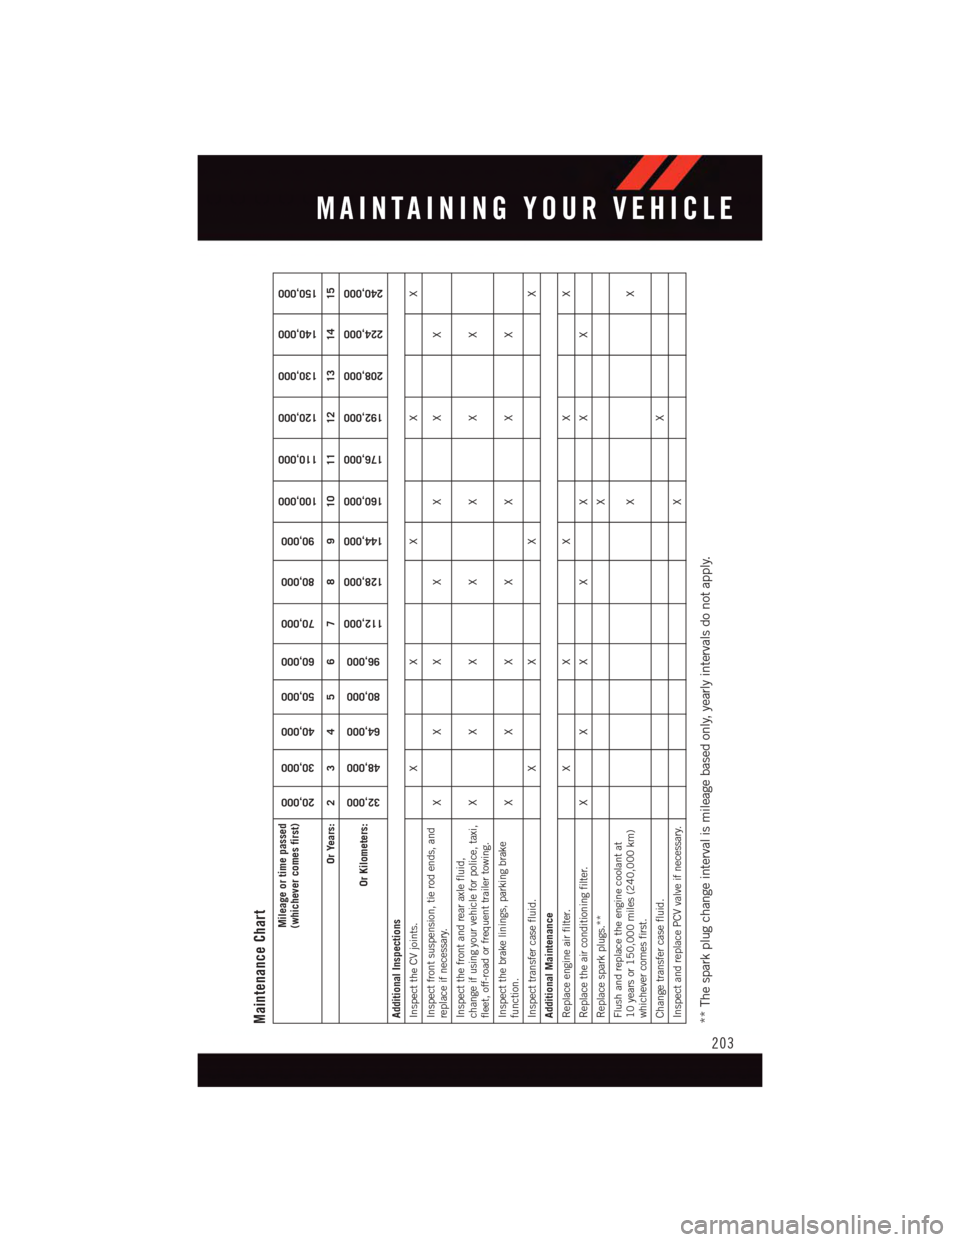 DODGE DURANGO 2015 3.G User Guide Maintenance Chart
Mileage or time passed(whichever comes first)
20,000
30,000
40,000
50,000
60,000
70,000
80,000
90,000
100,000
110,000
120,000
130,000
140,000
150,000
Or Years: 2 3 4 5 6 7 8 9 10 11 